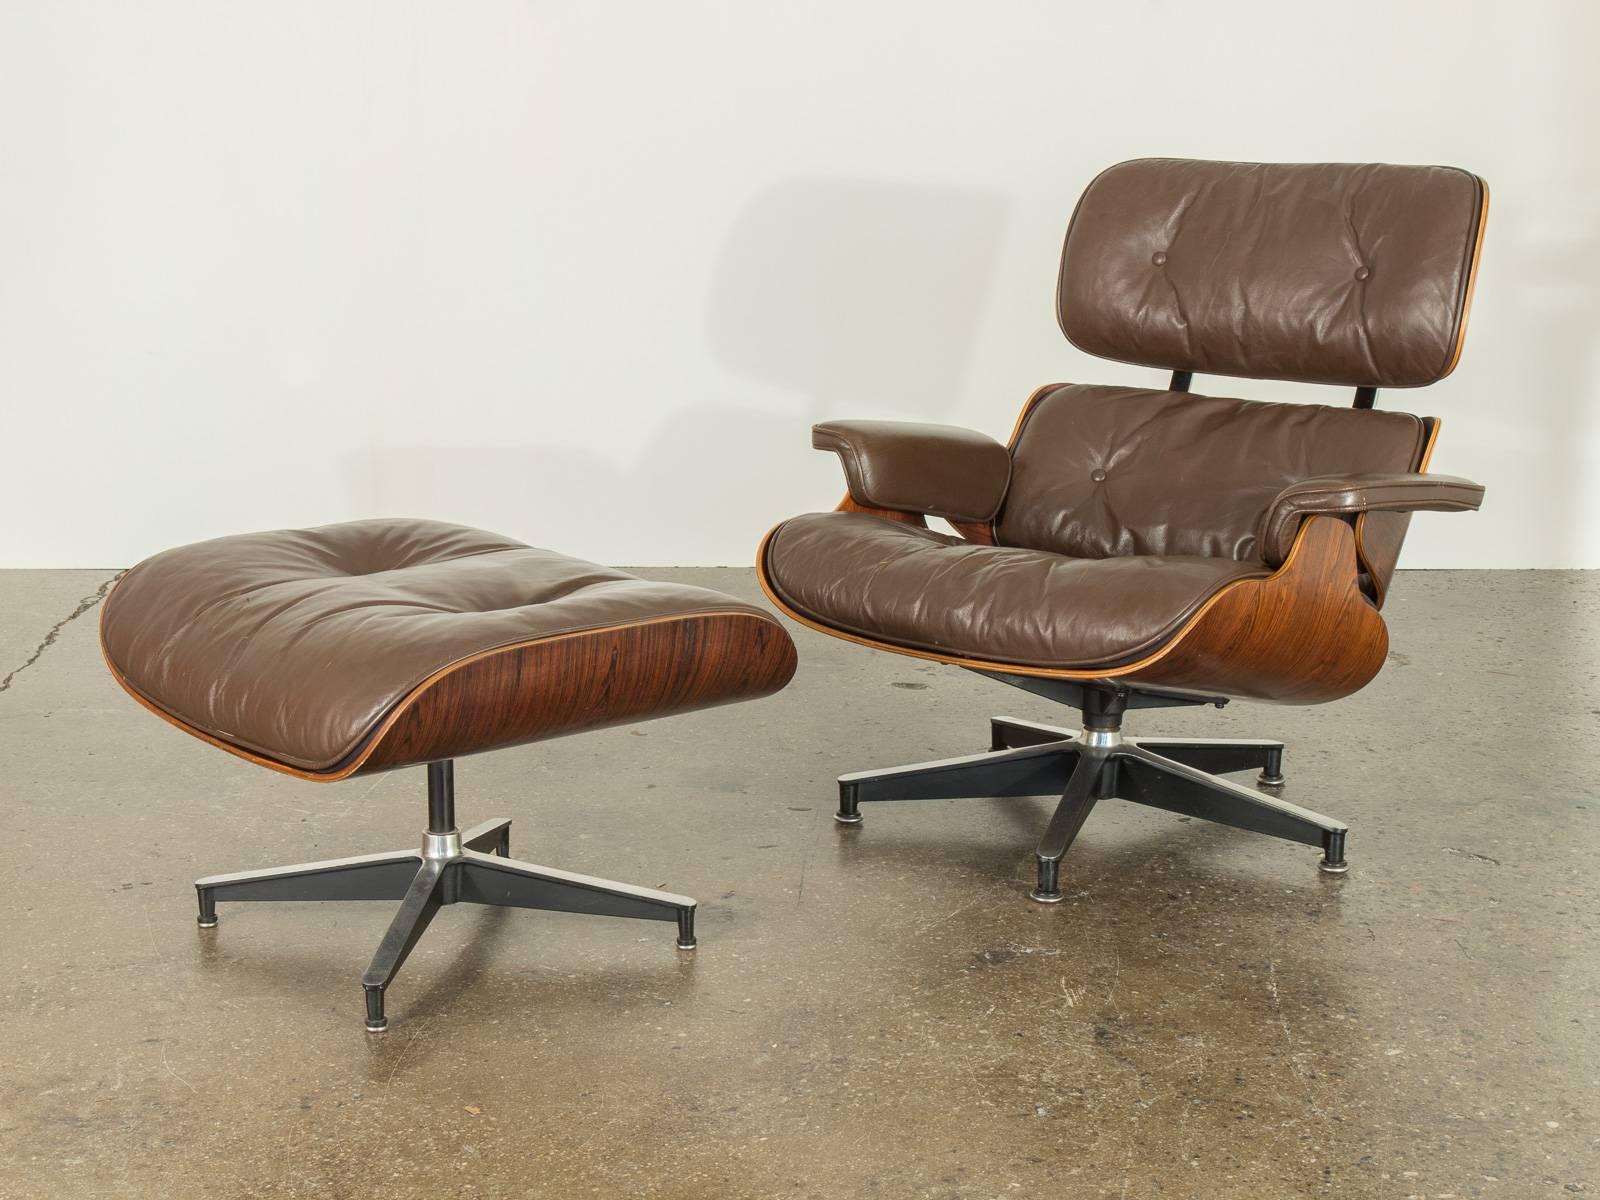 1964 Eames 670 lounge chair and ottoman in excellent vintage condition. Designed by Charles and Ray Eames for Herman Miller. Beautiful rosewood shell and soft brown leather cushions. Marked with Herman Miller medallion.

32.75